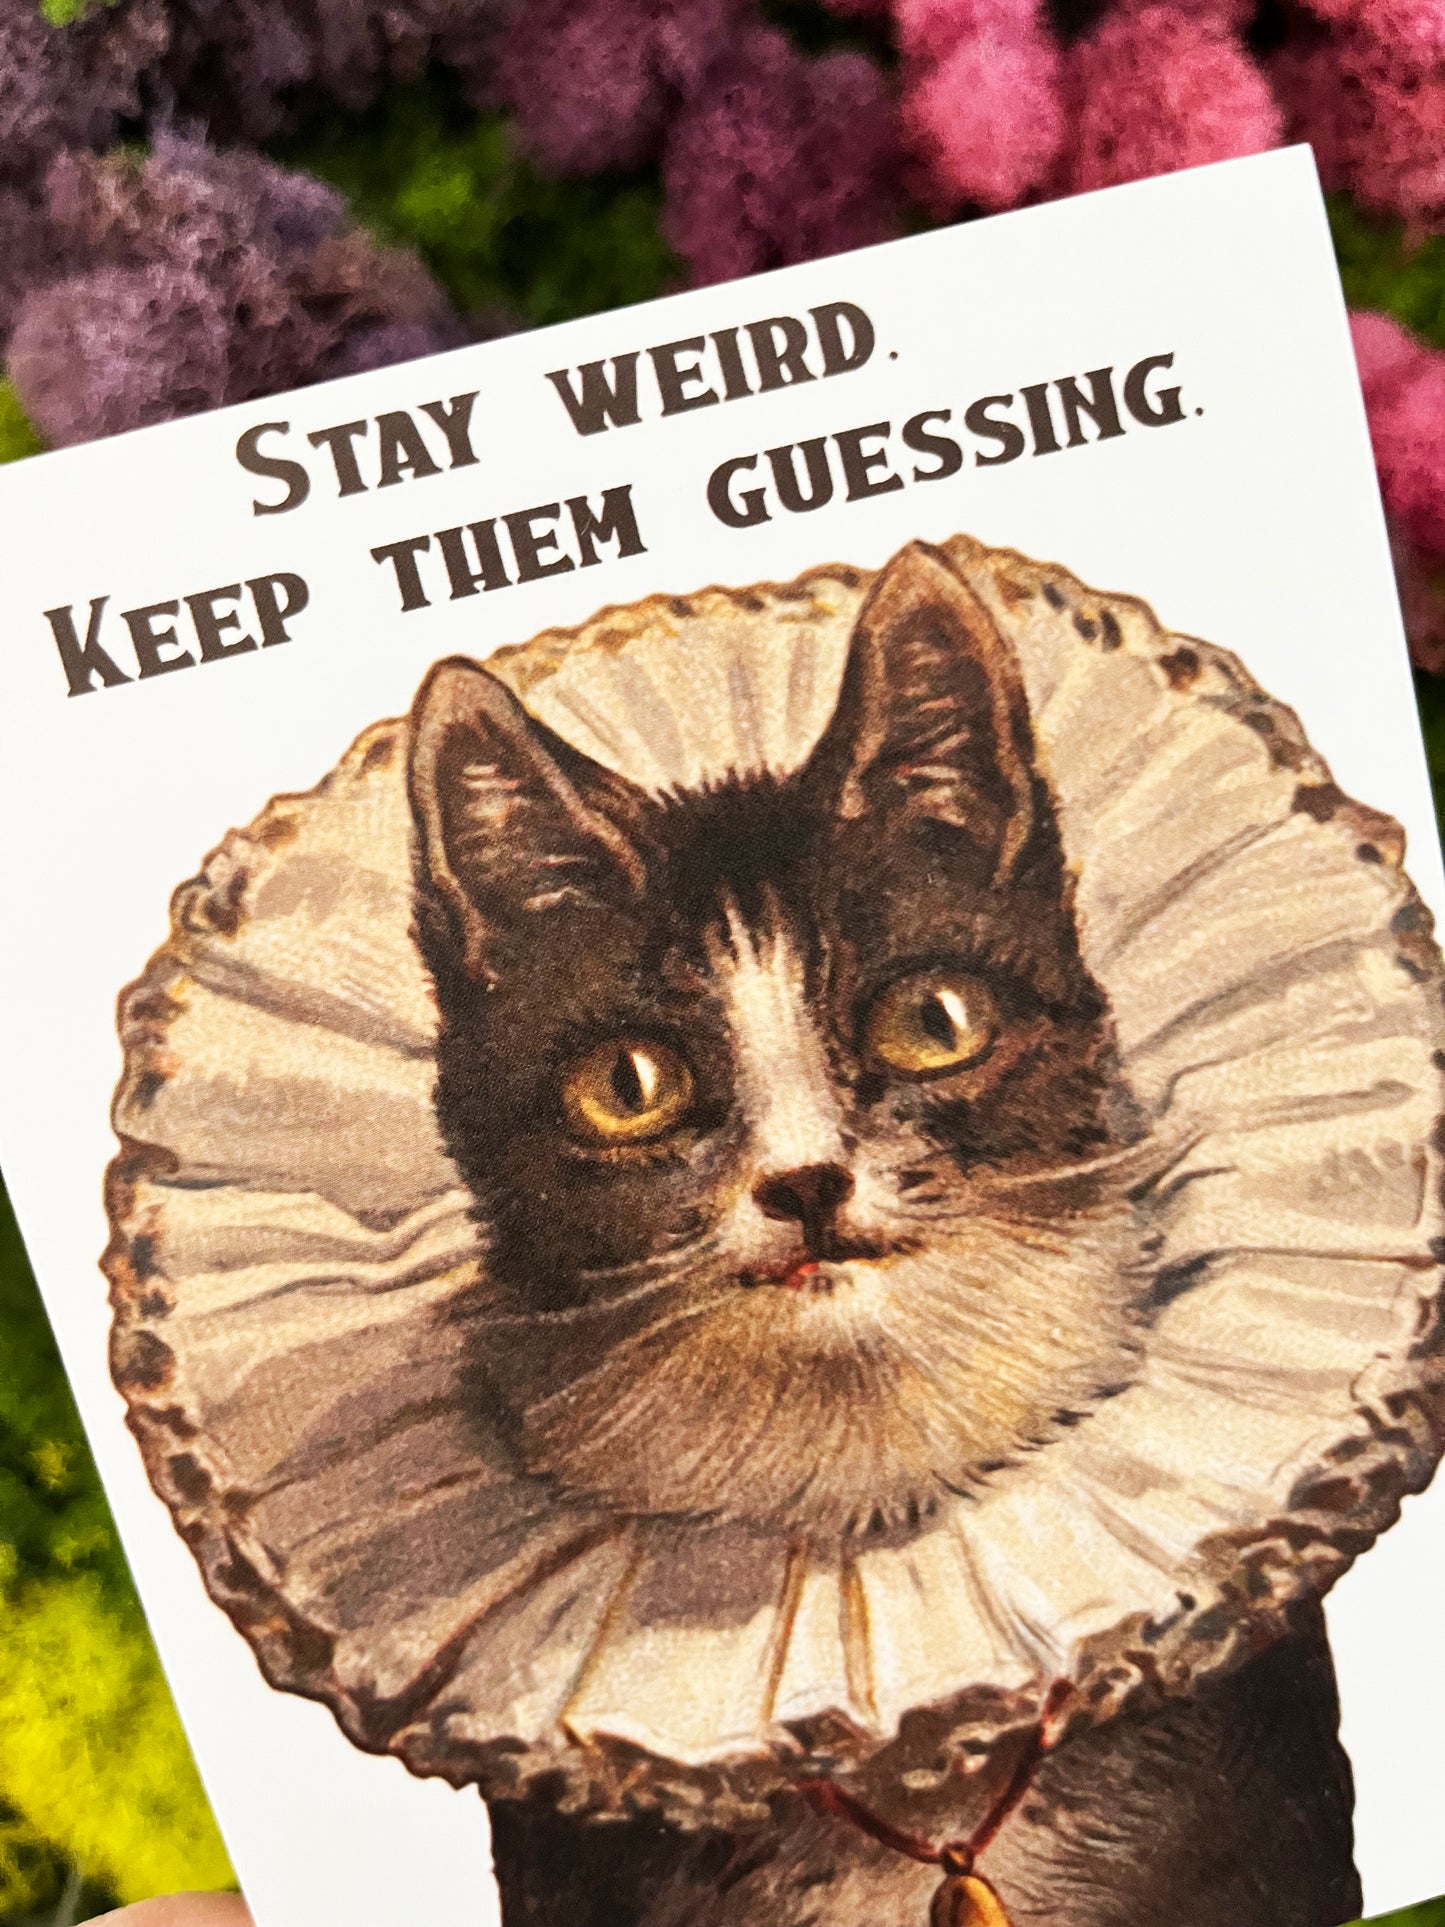 send mail to your friends with this cute blank note card weirdo stay weird keep them guessing mother's day father's day birthday congratulations celebration handwriting kitty